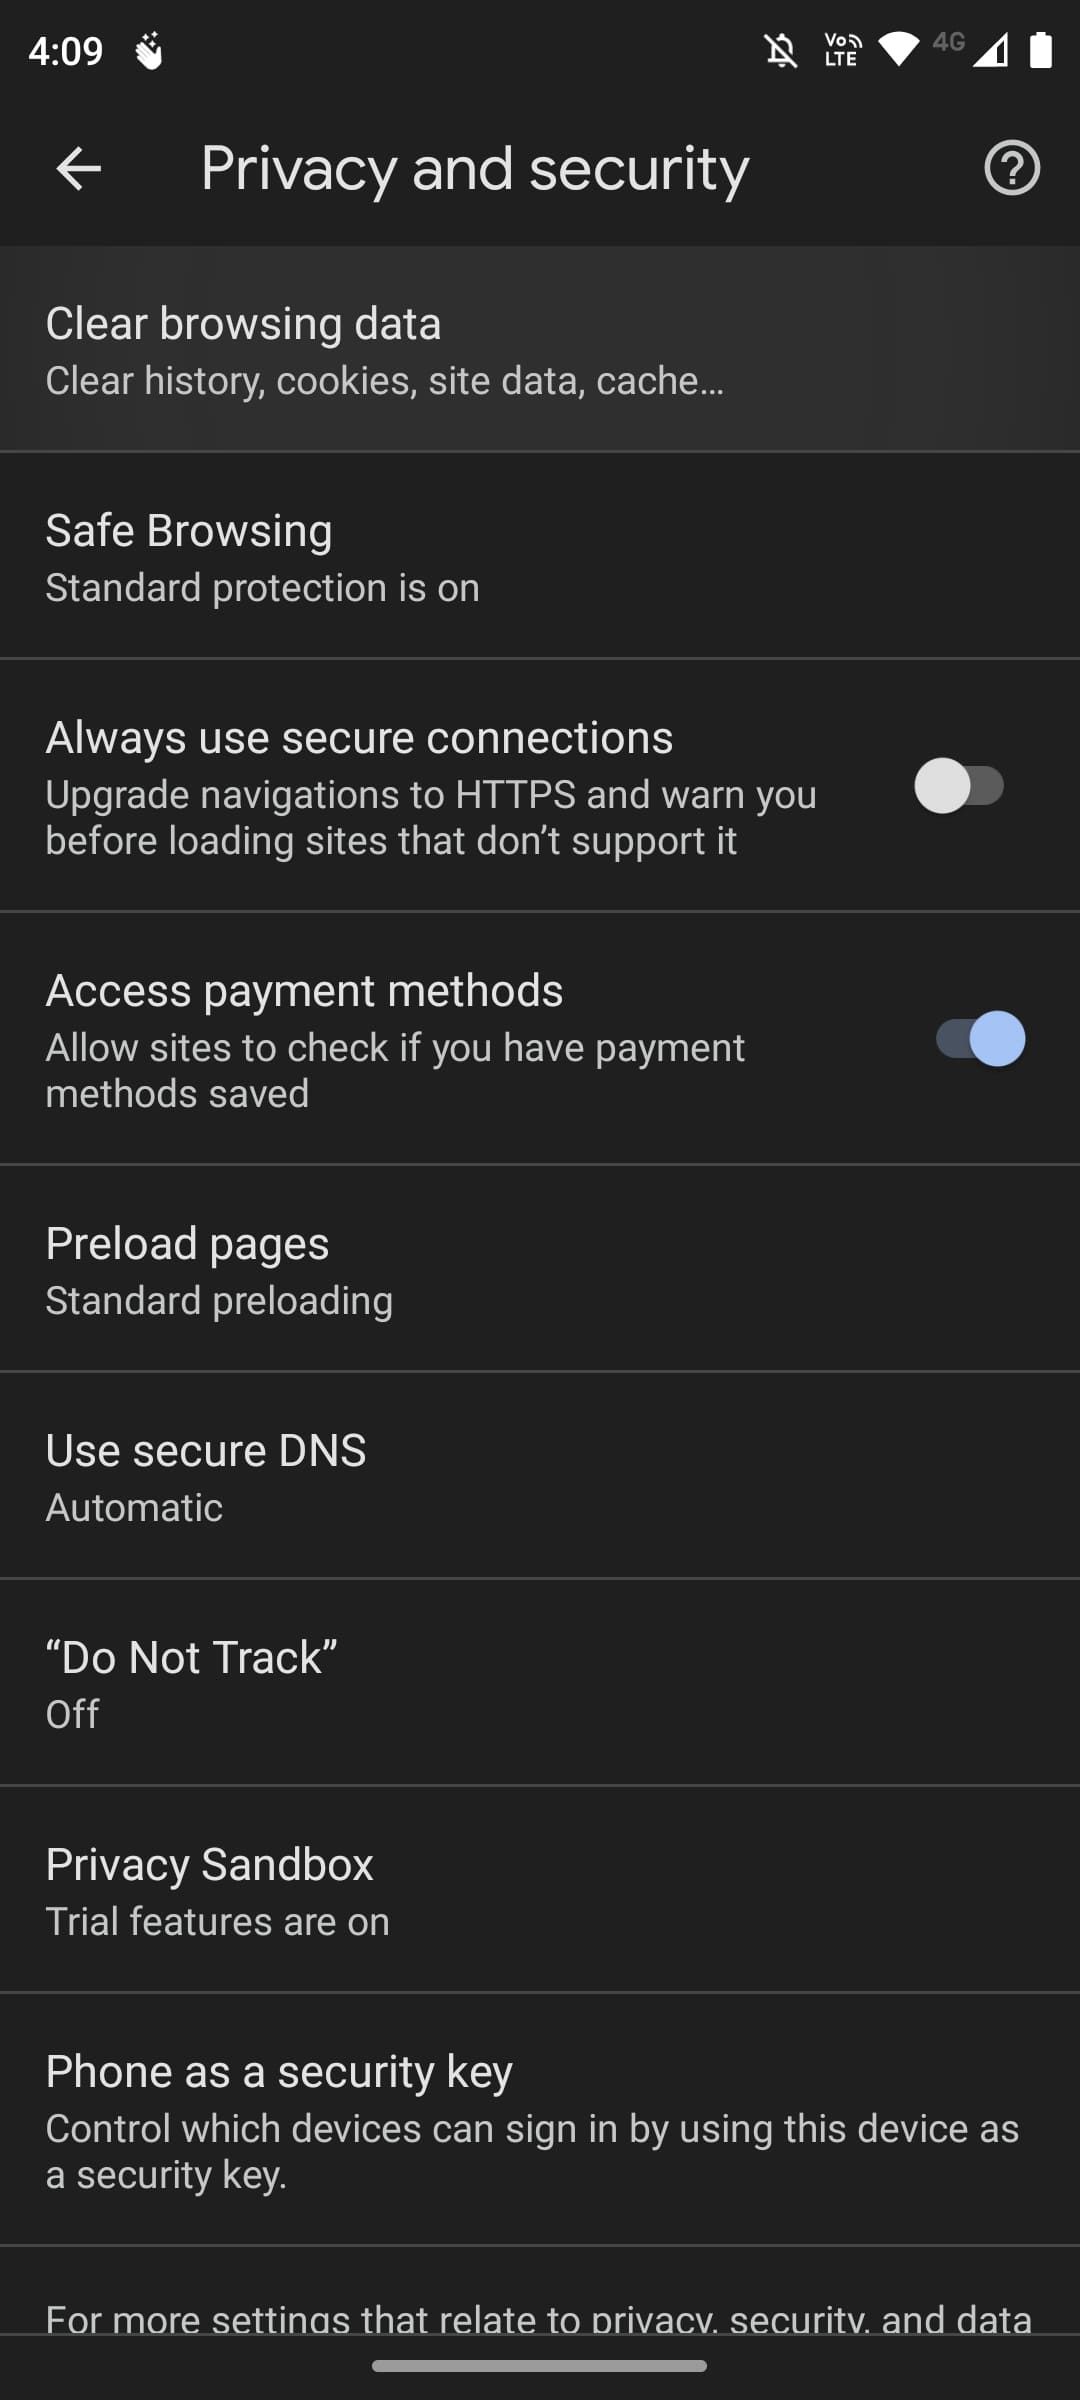 Privacy and security settings with clear browsing data highlighted